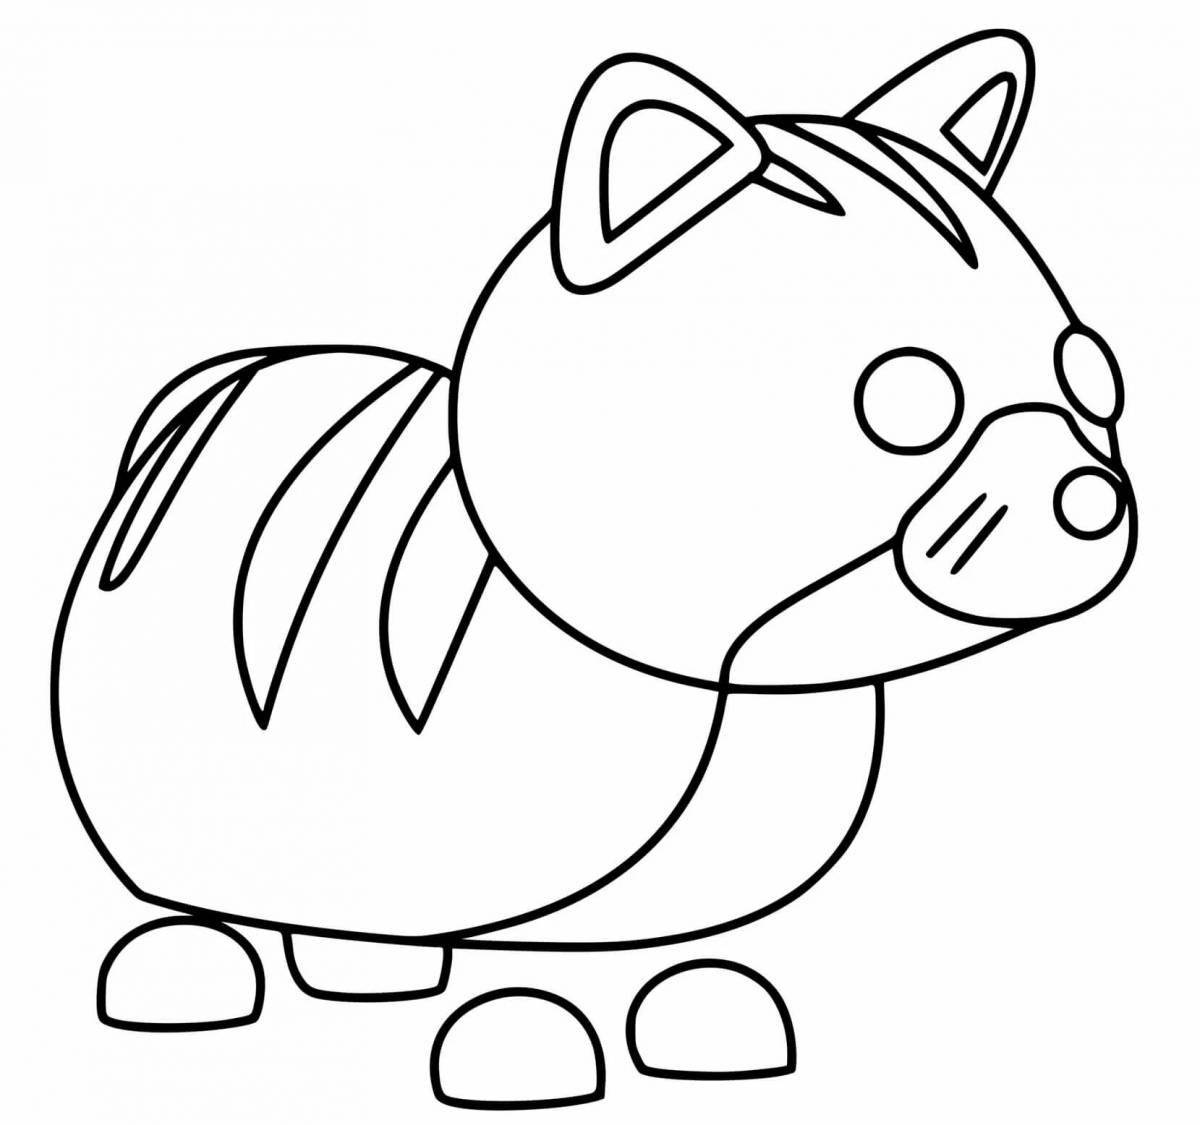 Adoption of a cute cow coloring page